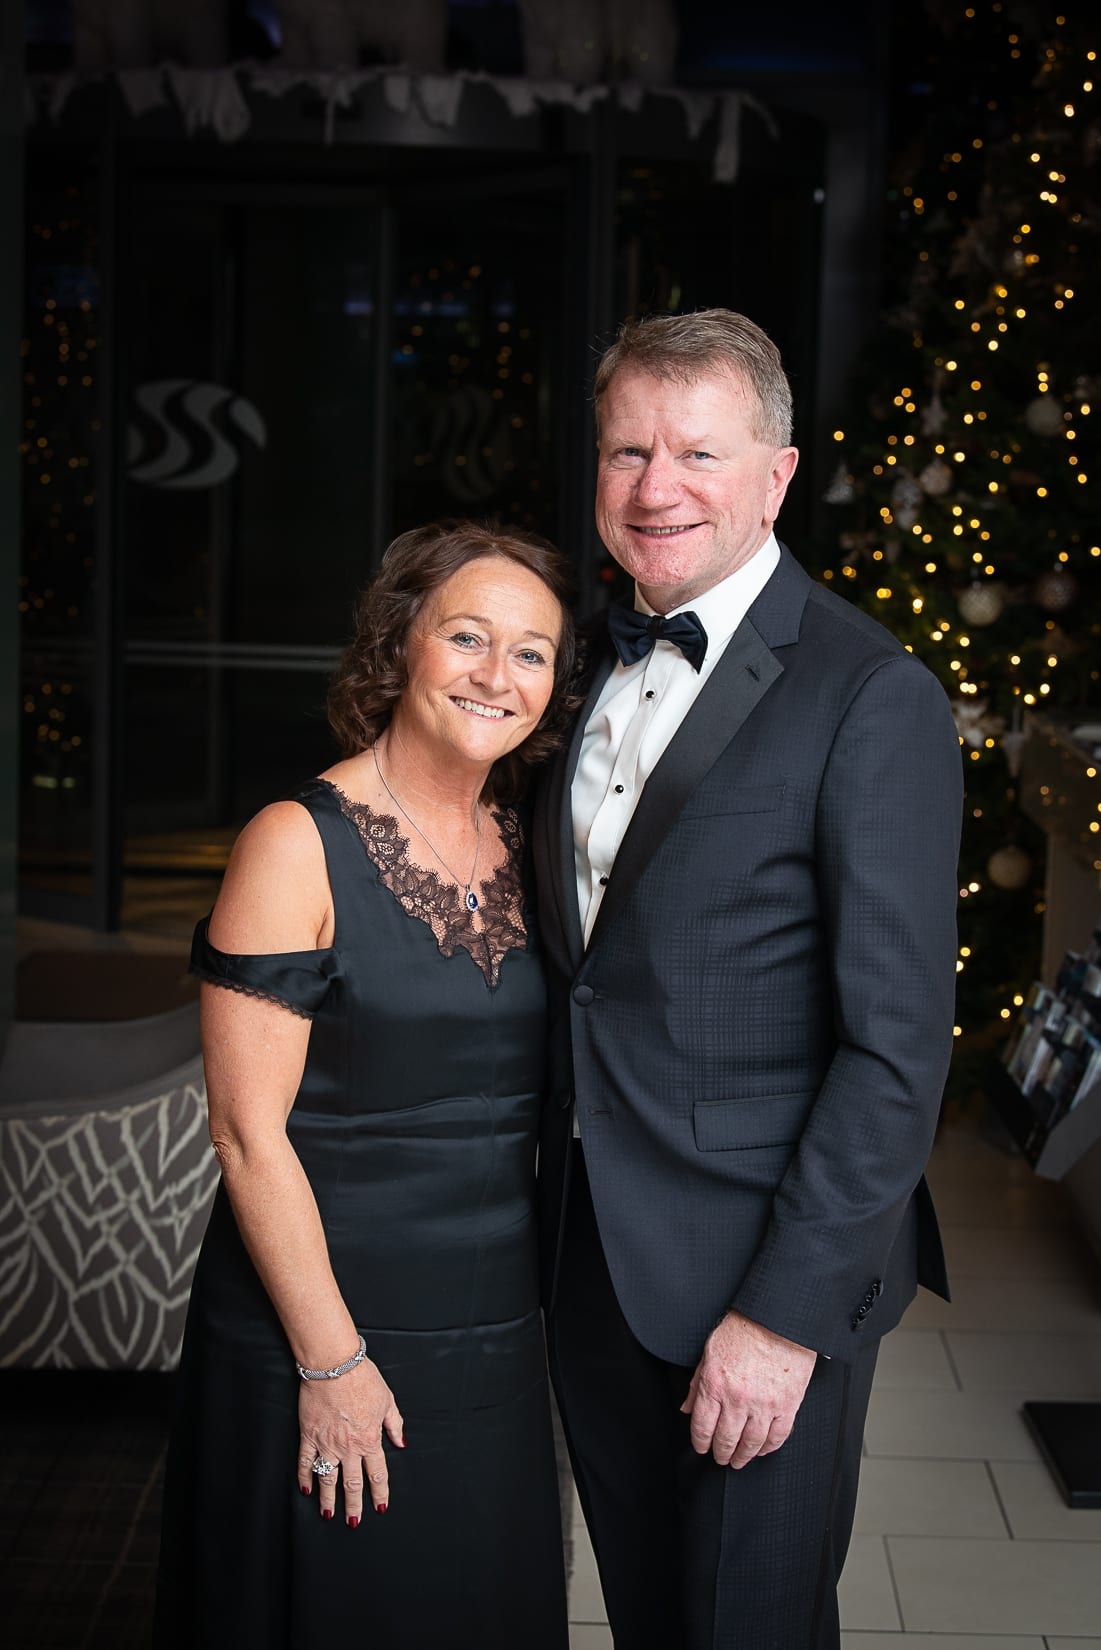 No repro fee-Limerick Chamber President’s Dinner
and Limerick Chamber Regional Business Awards 2019 which was held in the Strand Hotel on Friday 15th November /President Award/  - From Left to Right: Fionnola and Dr Hugh O’Donnell - WINNER / Ingenium Training and Consultancy,
Photo credit Shauna Kennedy